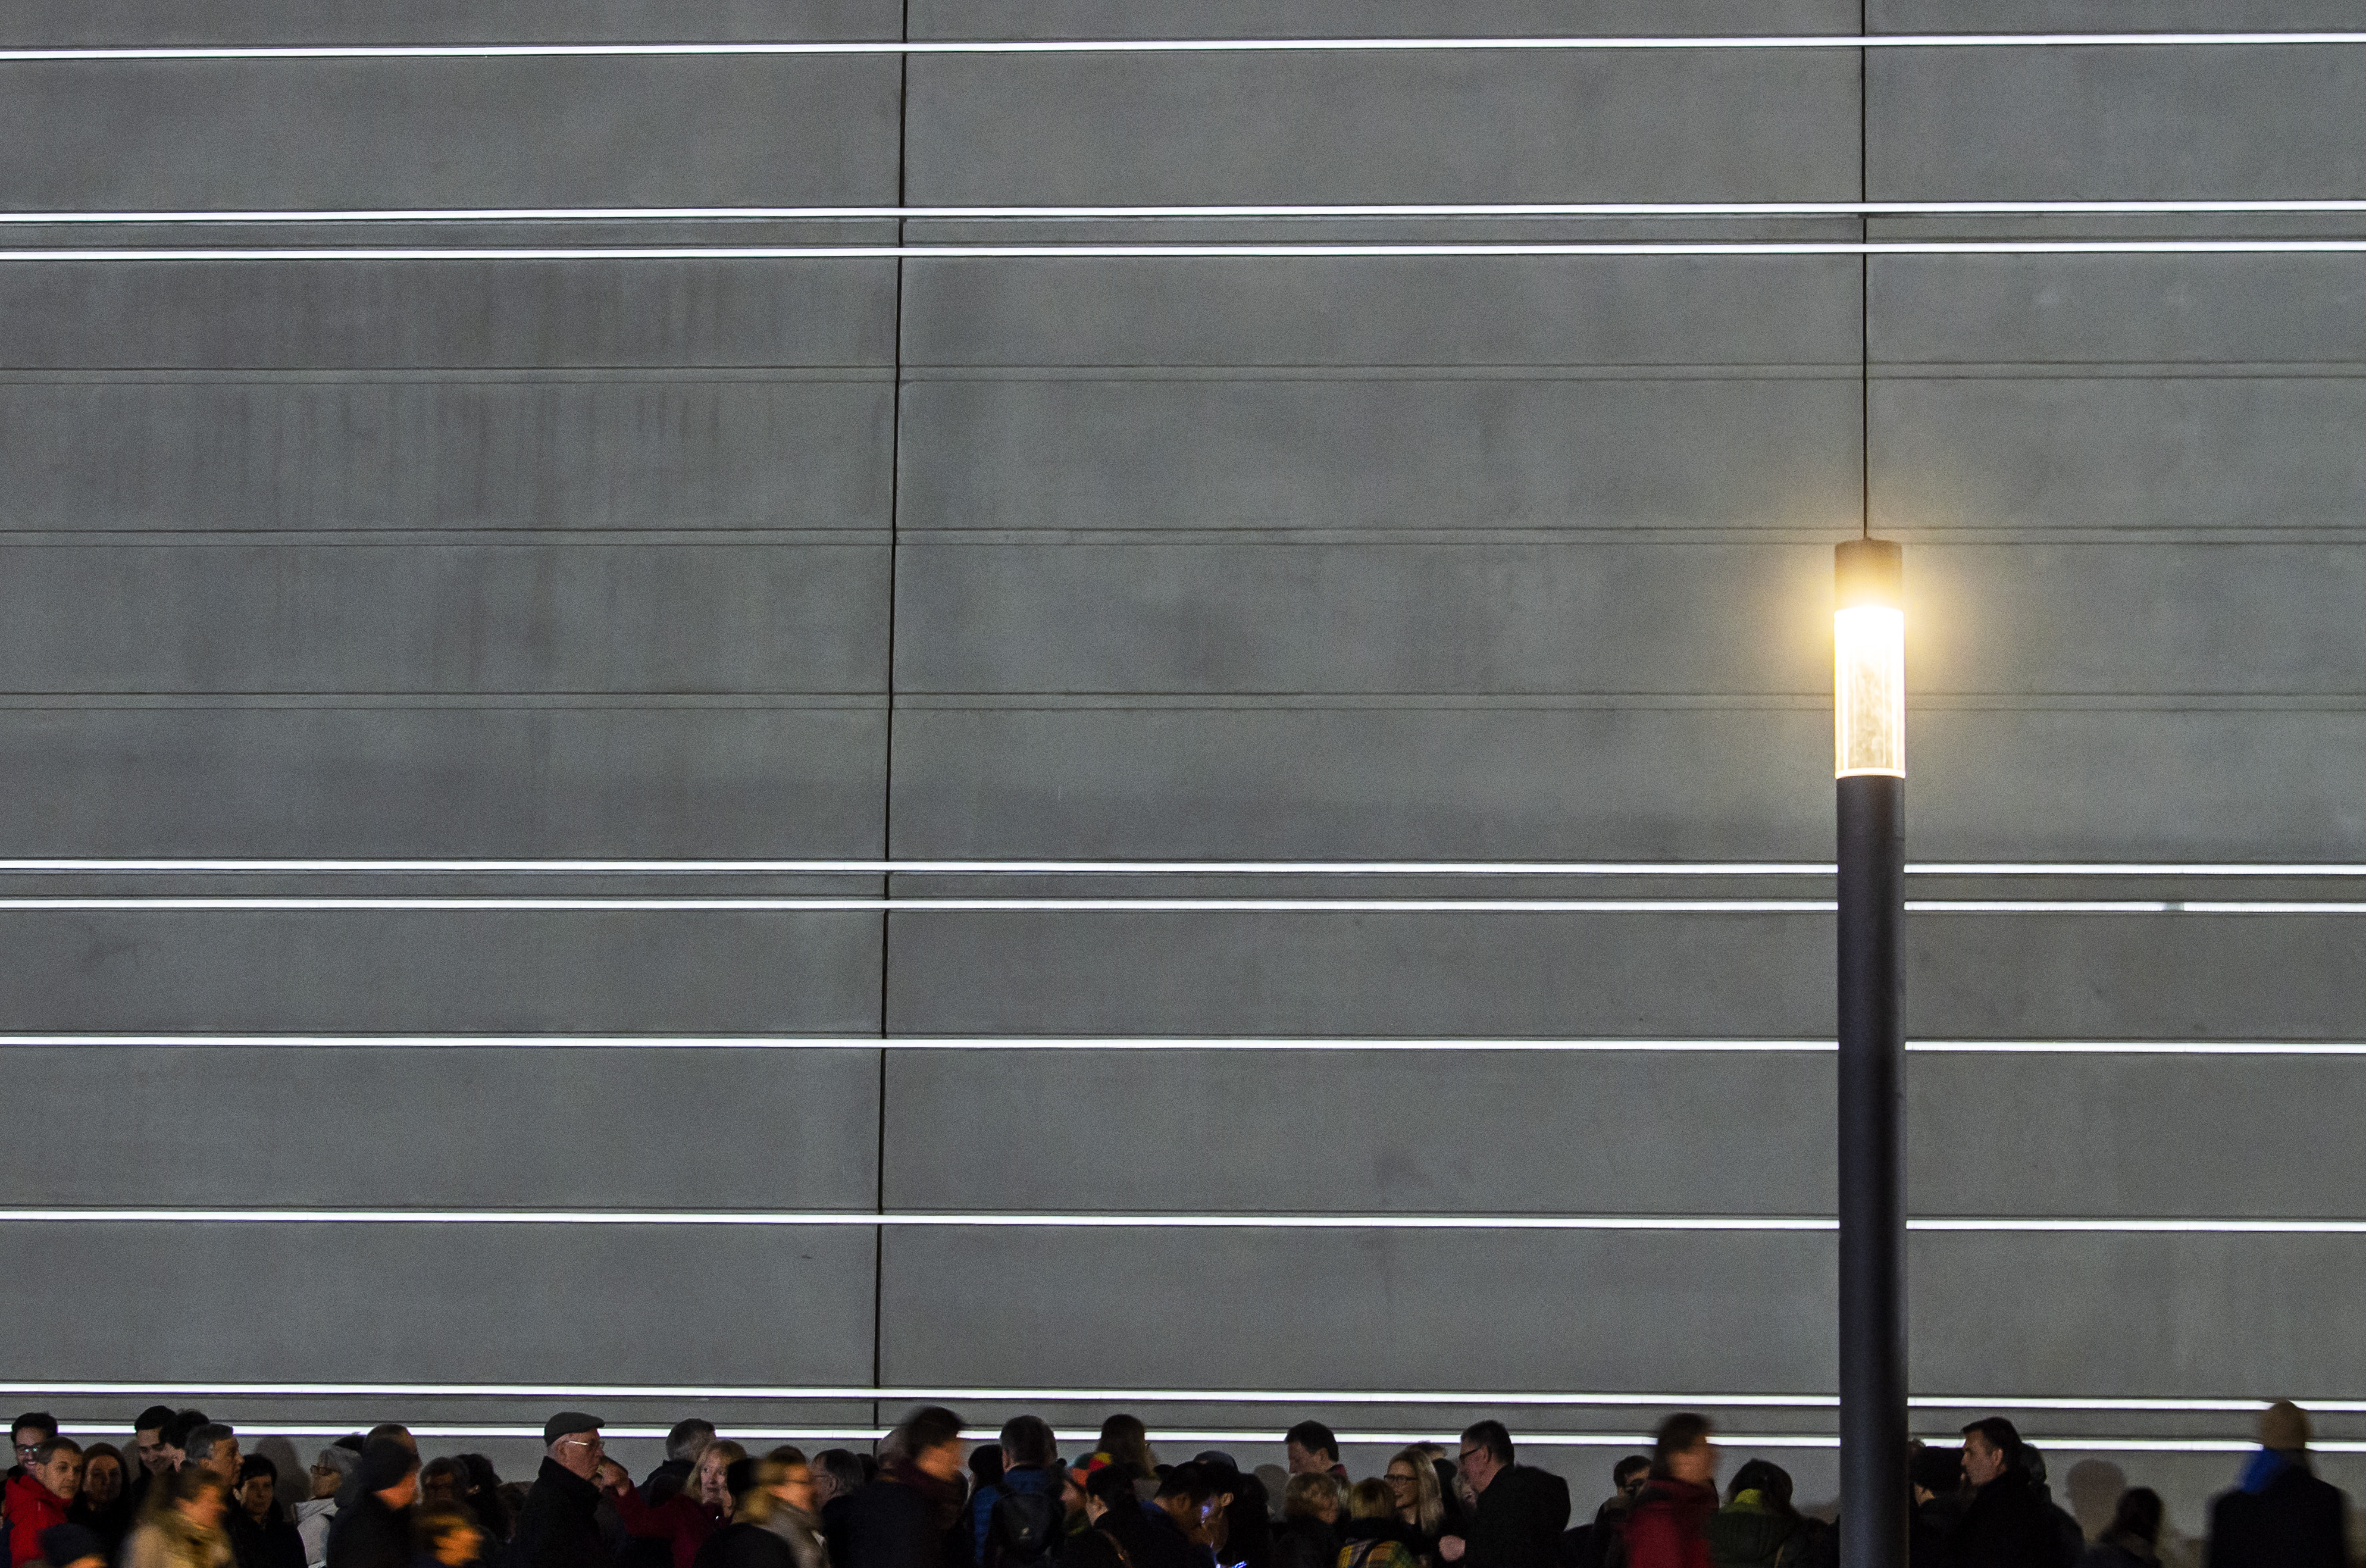 People stand in front of the new Bauhaus Museum building during a light installation performance at the official opening by the Klassik Stiftung Weimar in Weimar, Germany, Friday, April 5, 2019. The museum, designed by Berlin-based Heike Hanada, will focus on the early Bauhaus that was founded in Weimar in 1919 and stayed there until 1925. (AP Photo/Jens Meyer)